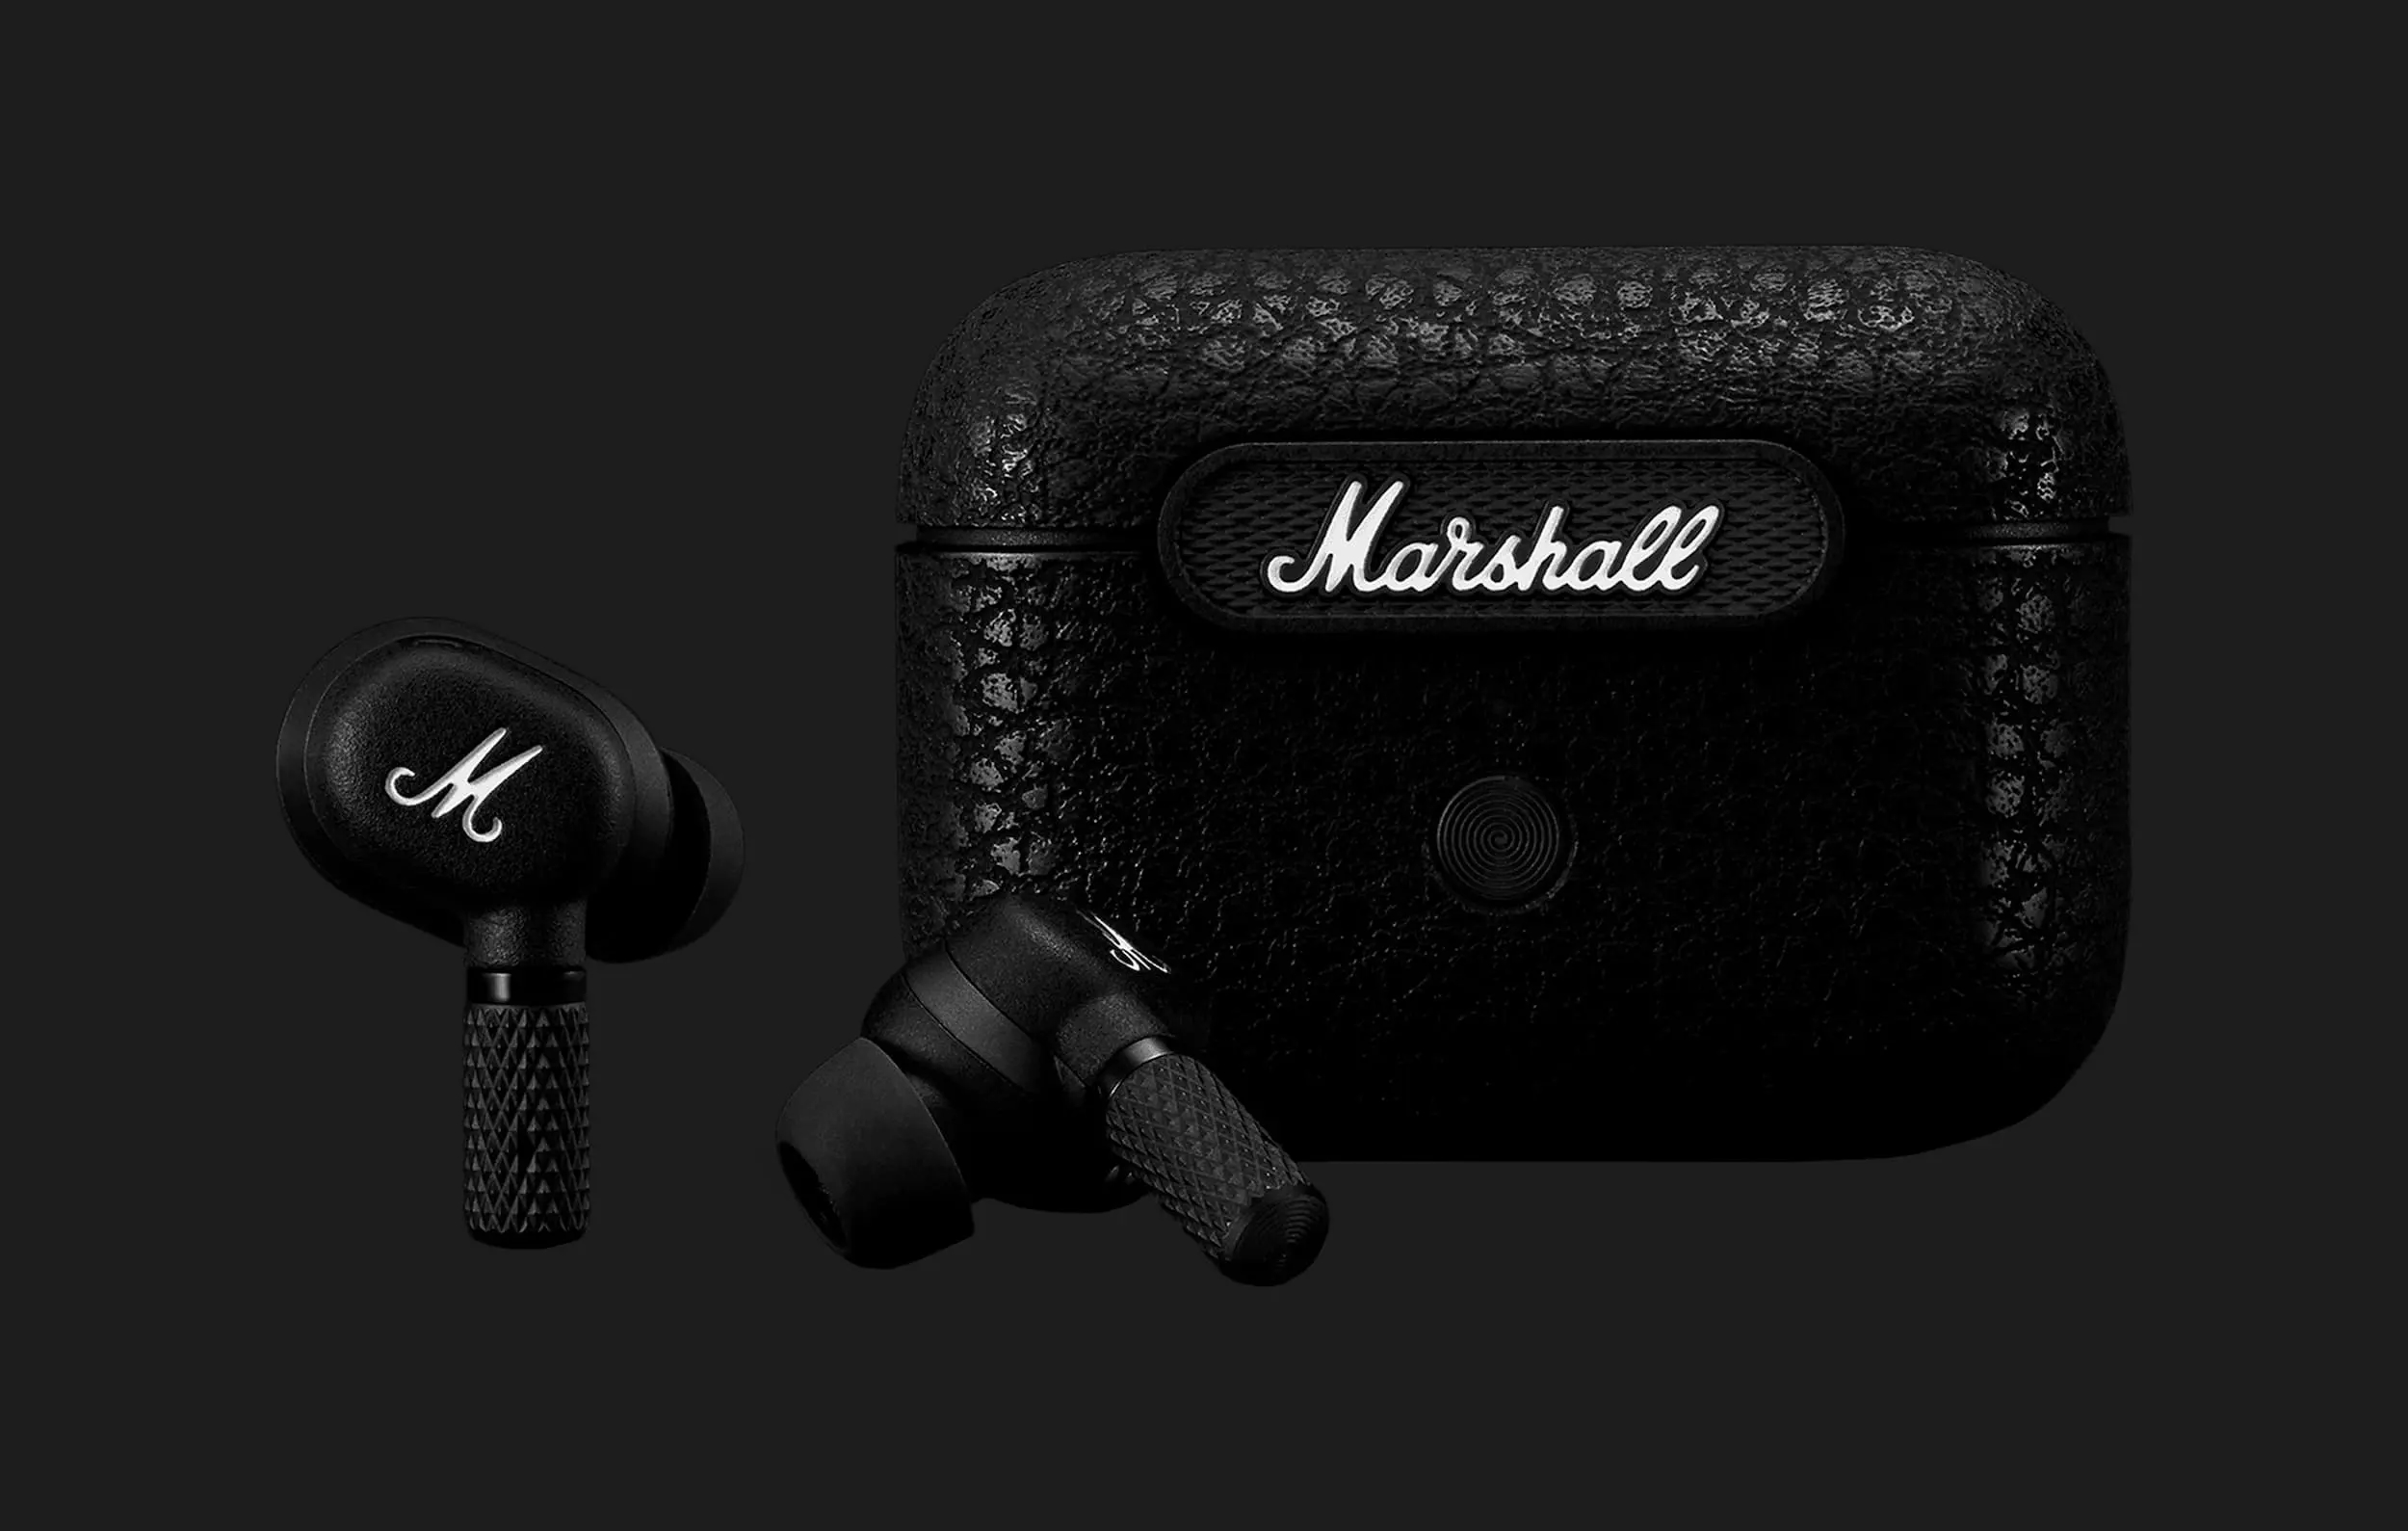 Marshall Motif on Amazon: TWS headphones with ANC, water protection and up to 20 hours of battery life for $80 off